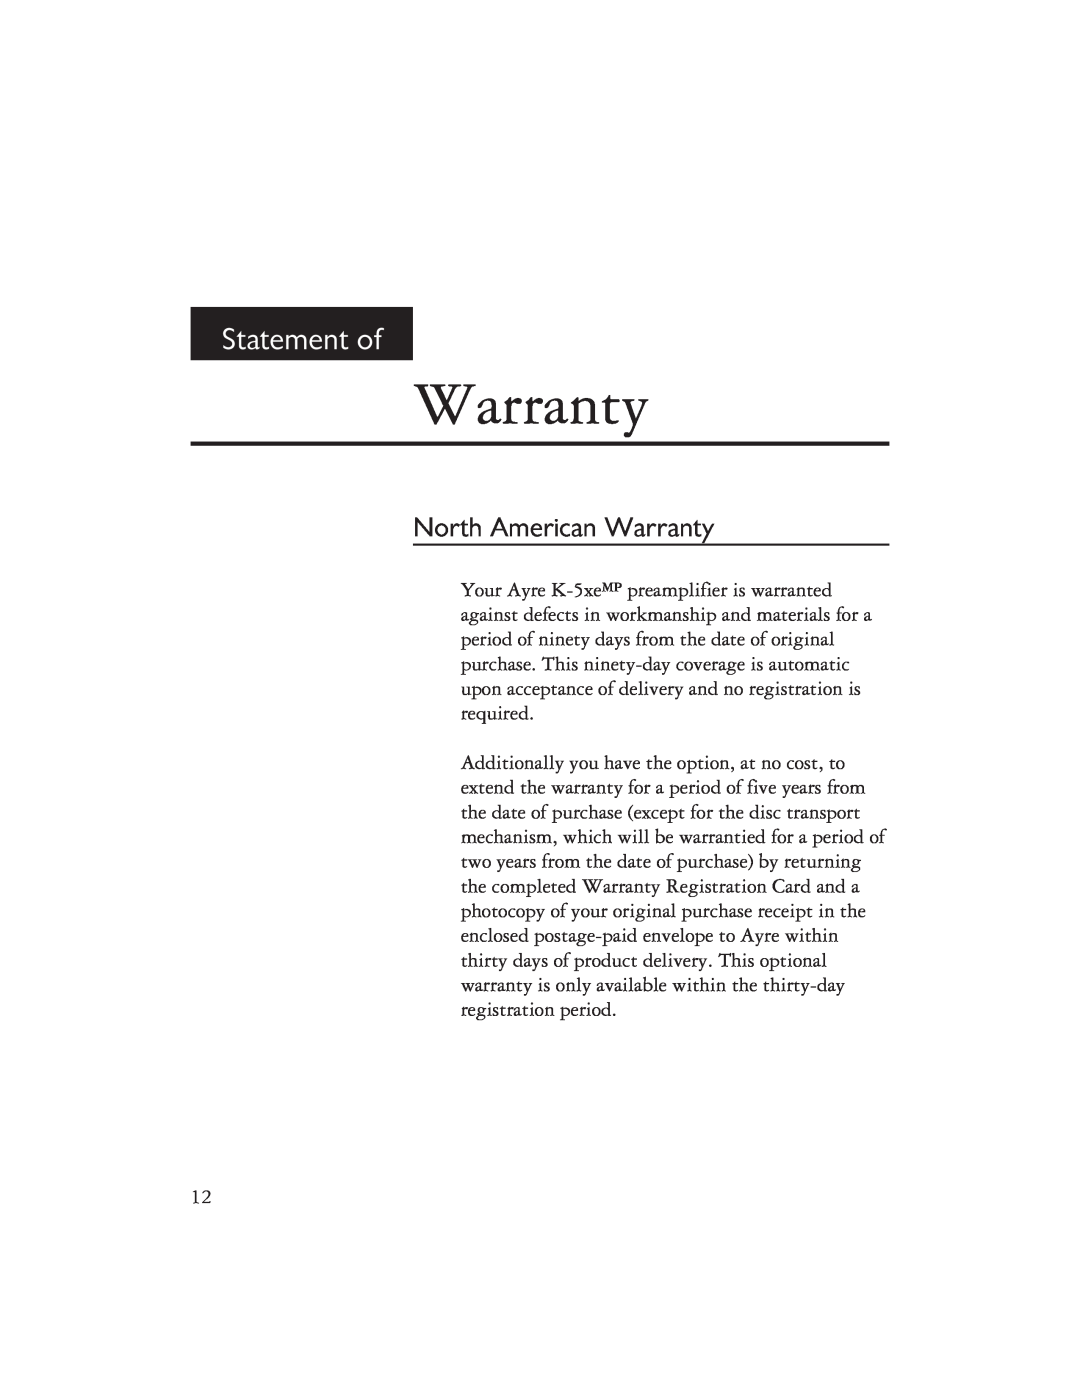 Ayre Acoustics K-5XEMP owner manual Statement of, North American Warranty 